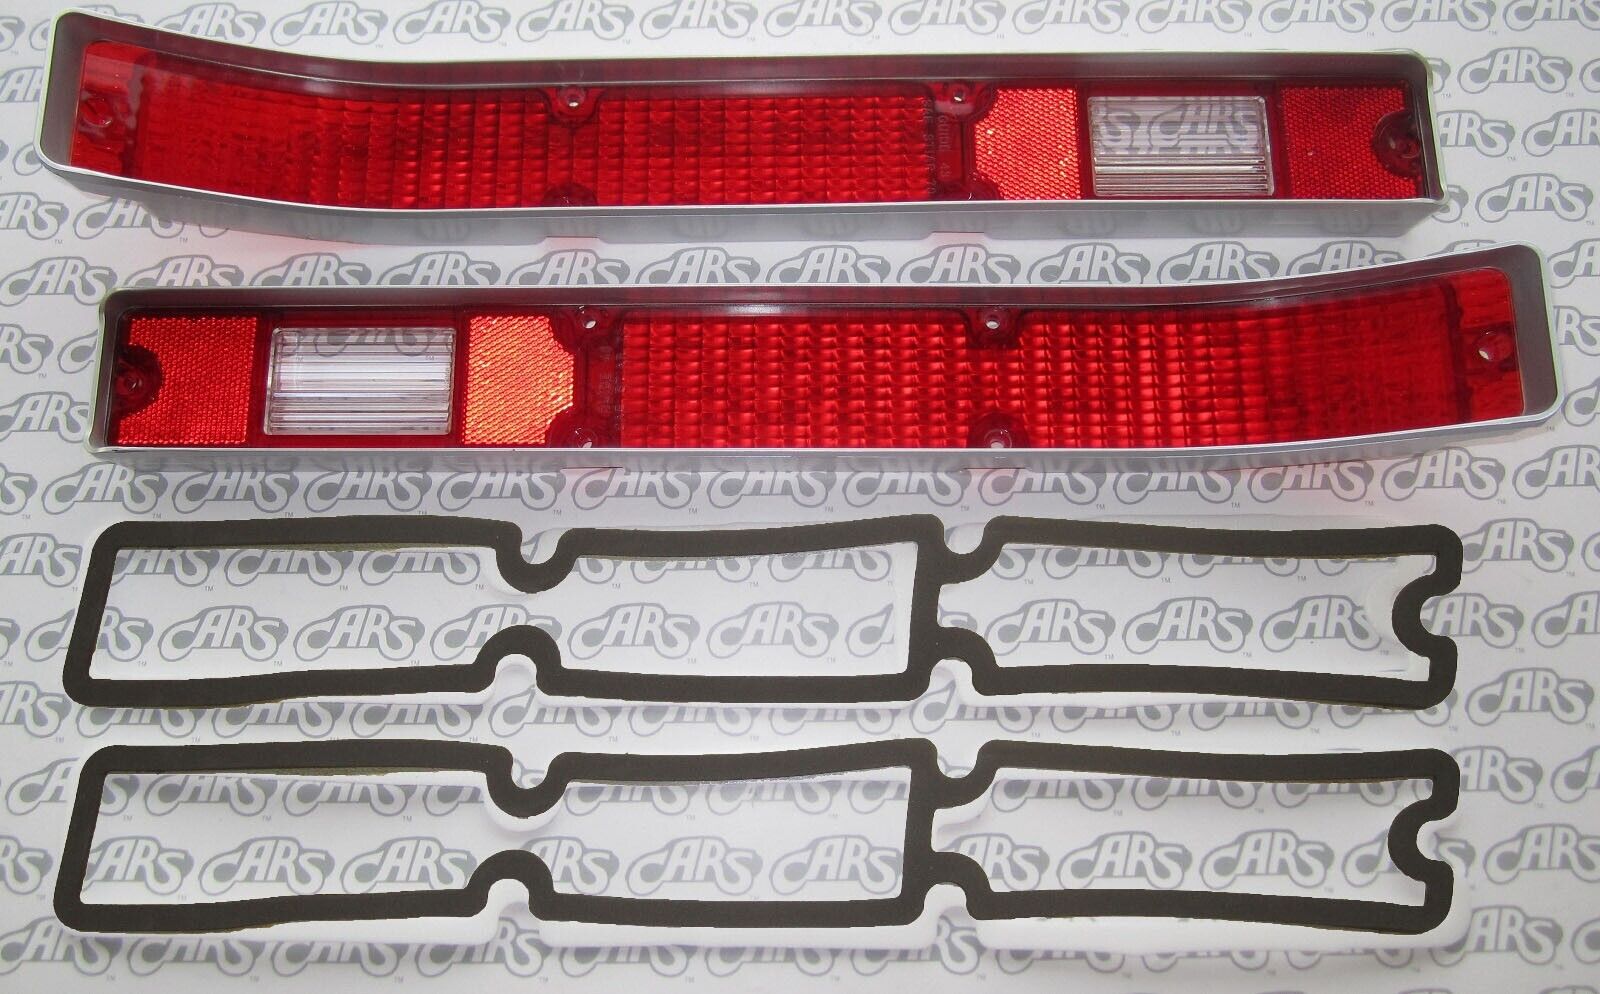 1970 Buick Skylark, GS, GSX Tail Lamp Lenses with Gaskets. OEM #5962139